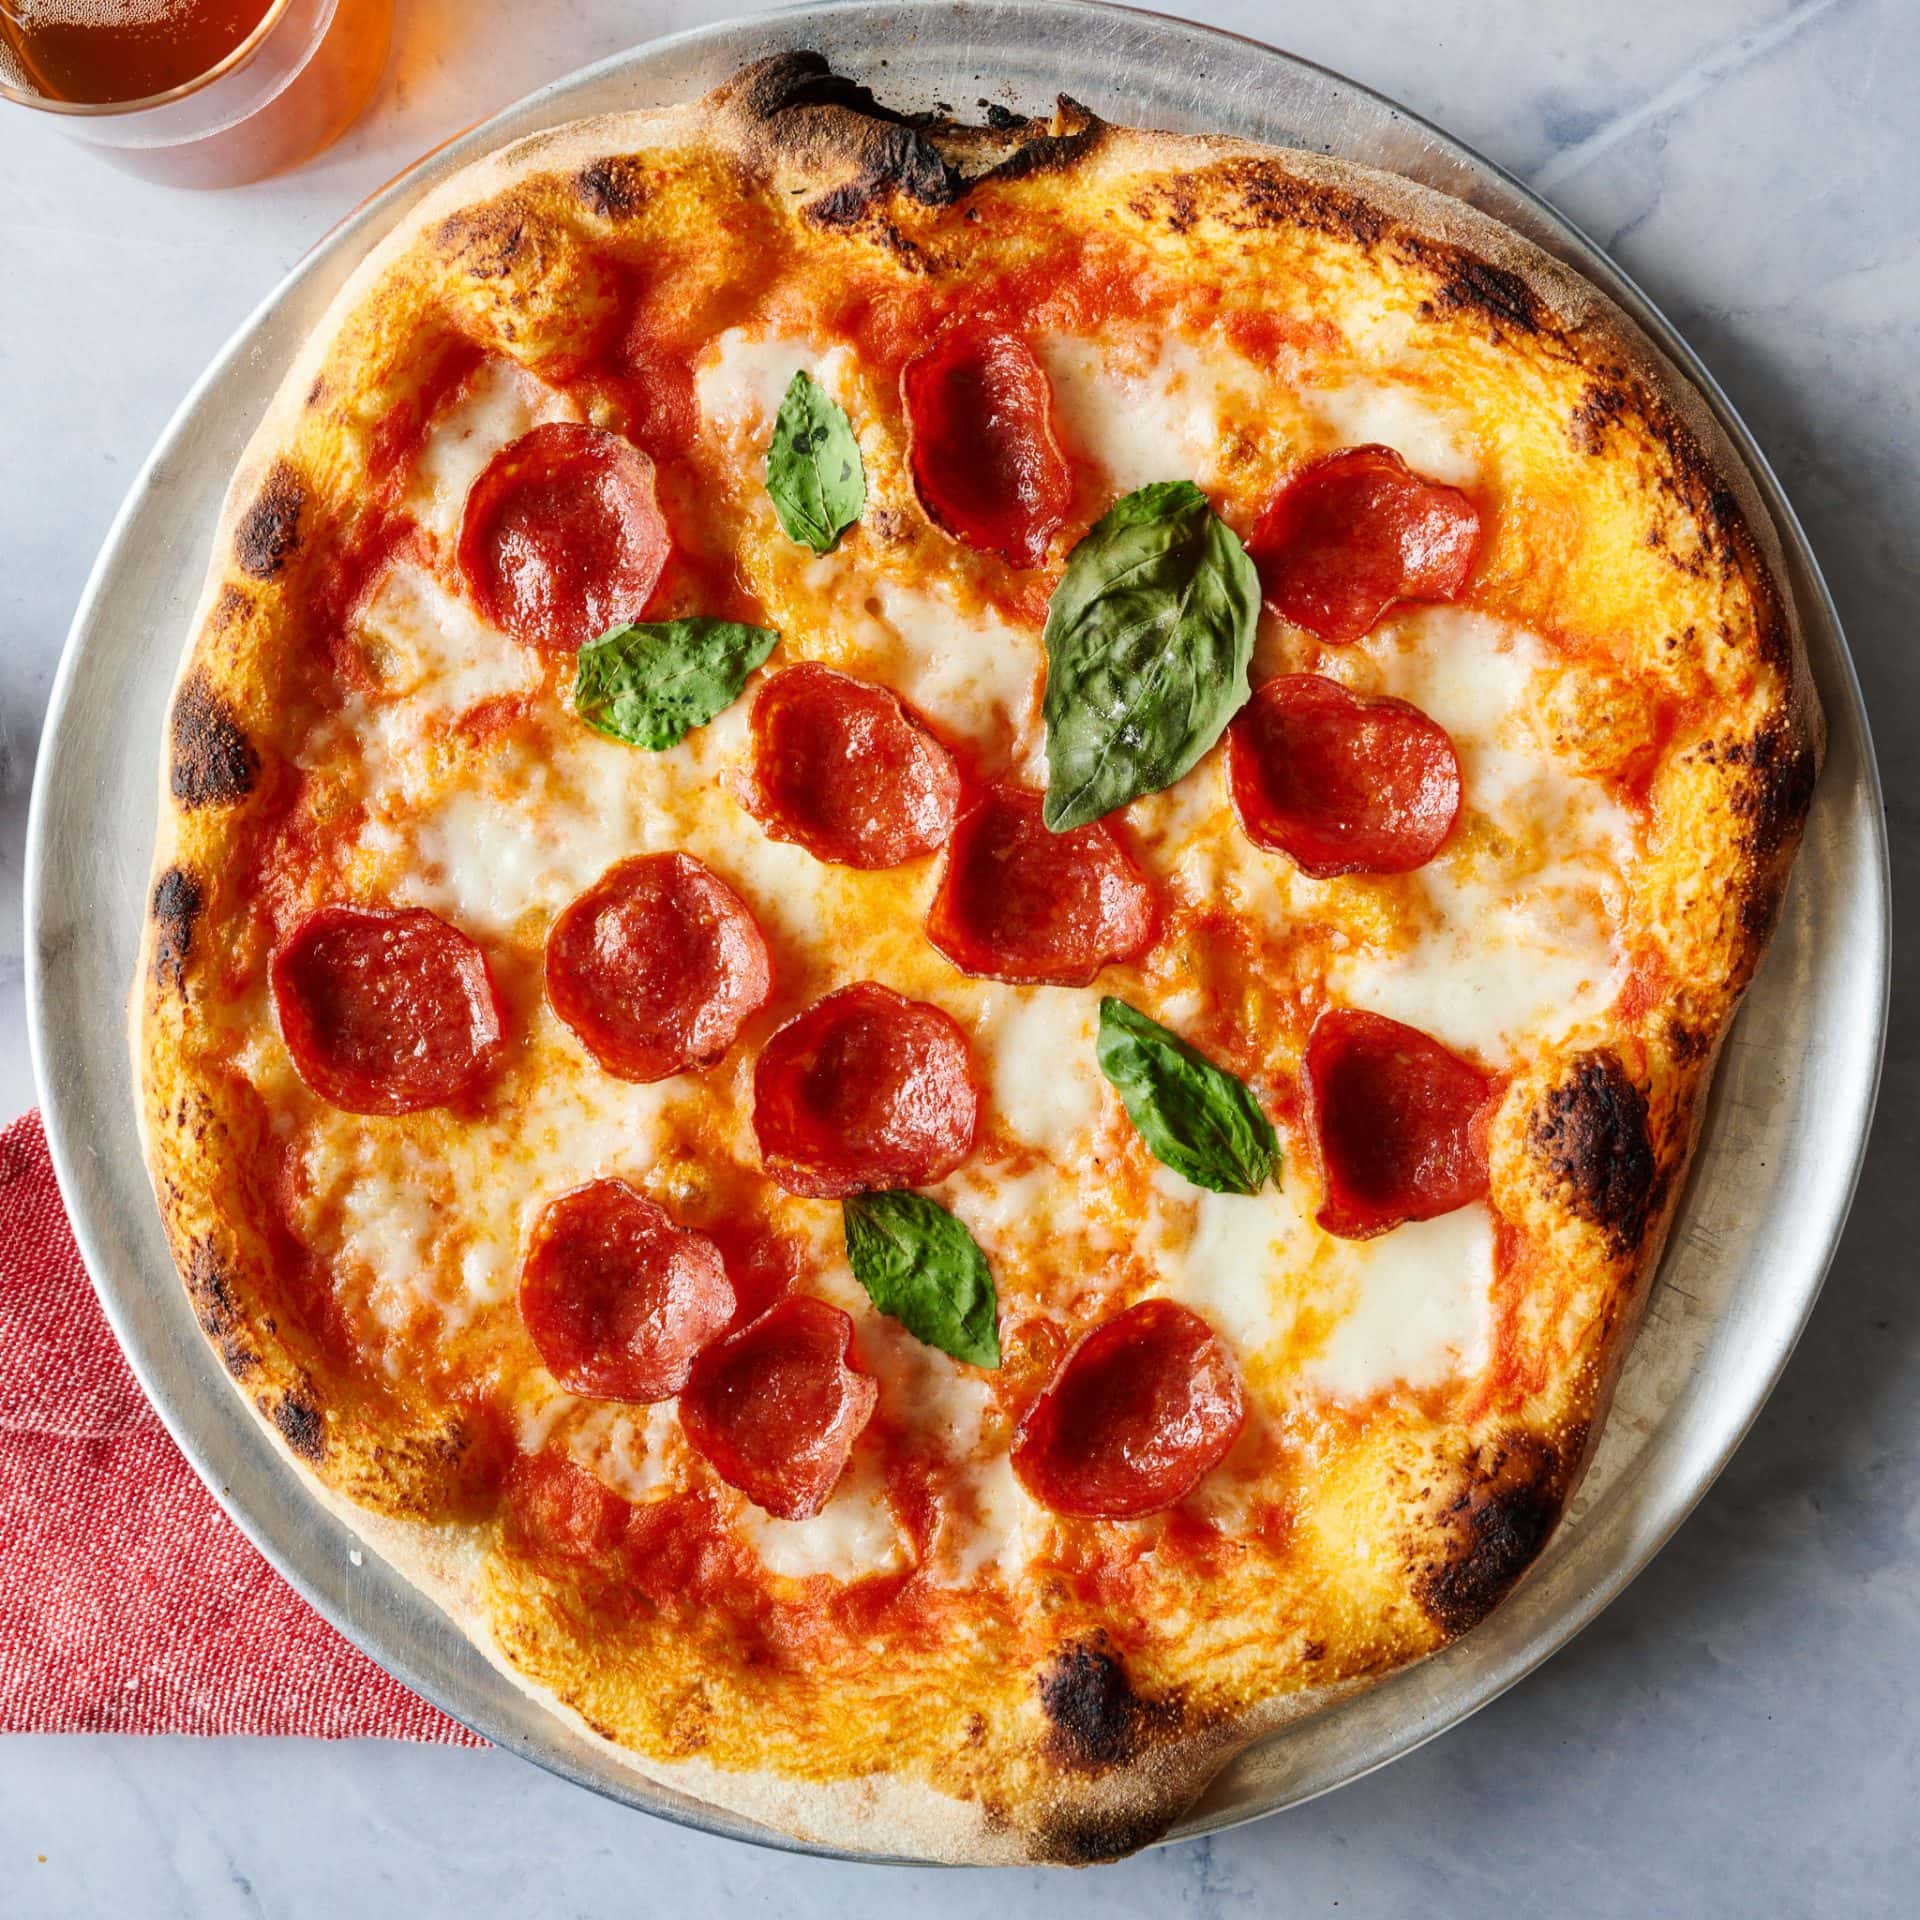 How to Make Pizza at Home Without Oven: The Ultimate Guide